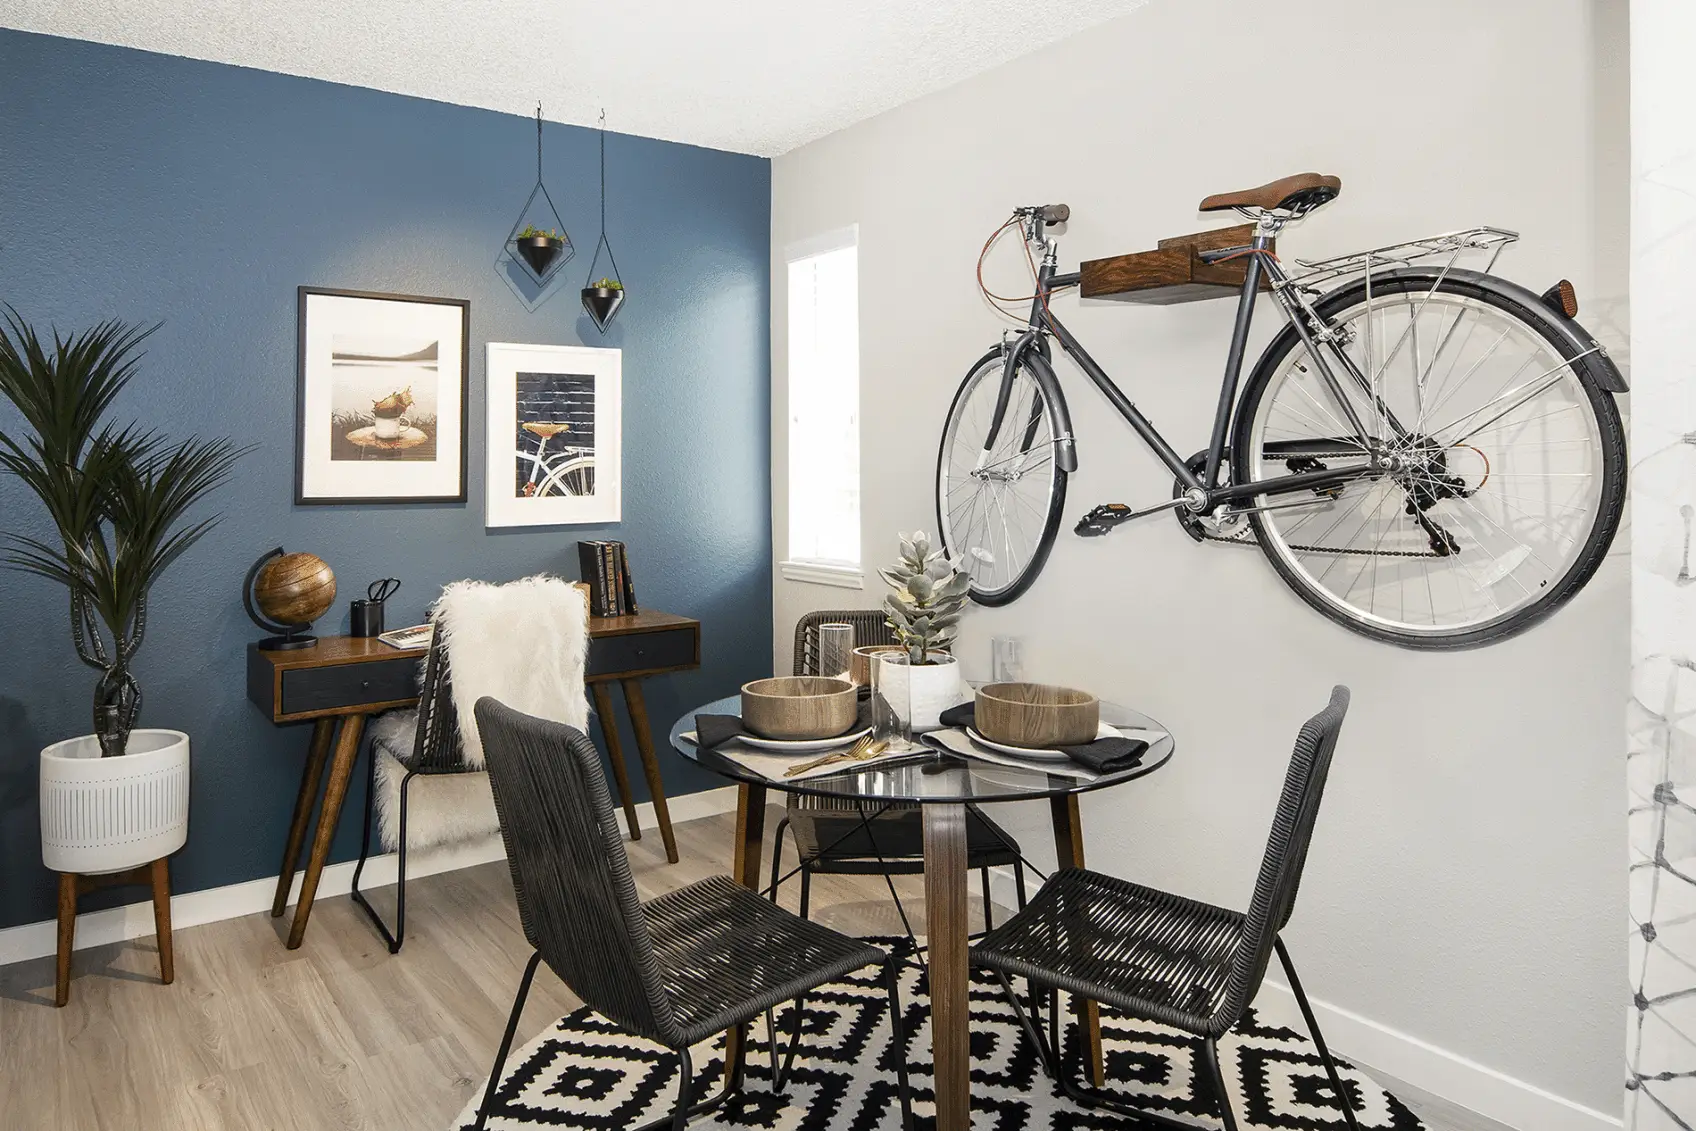 Dining nook with blue accent wall, small window